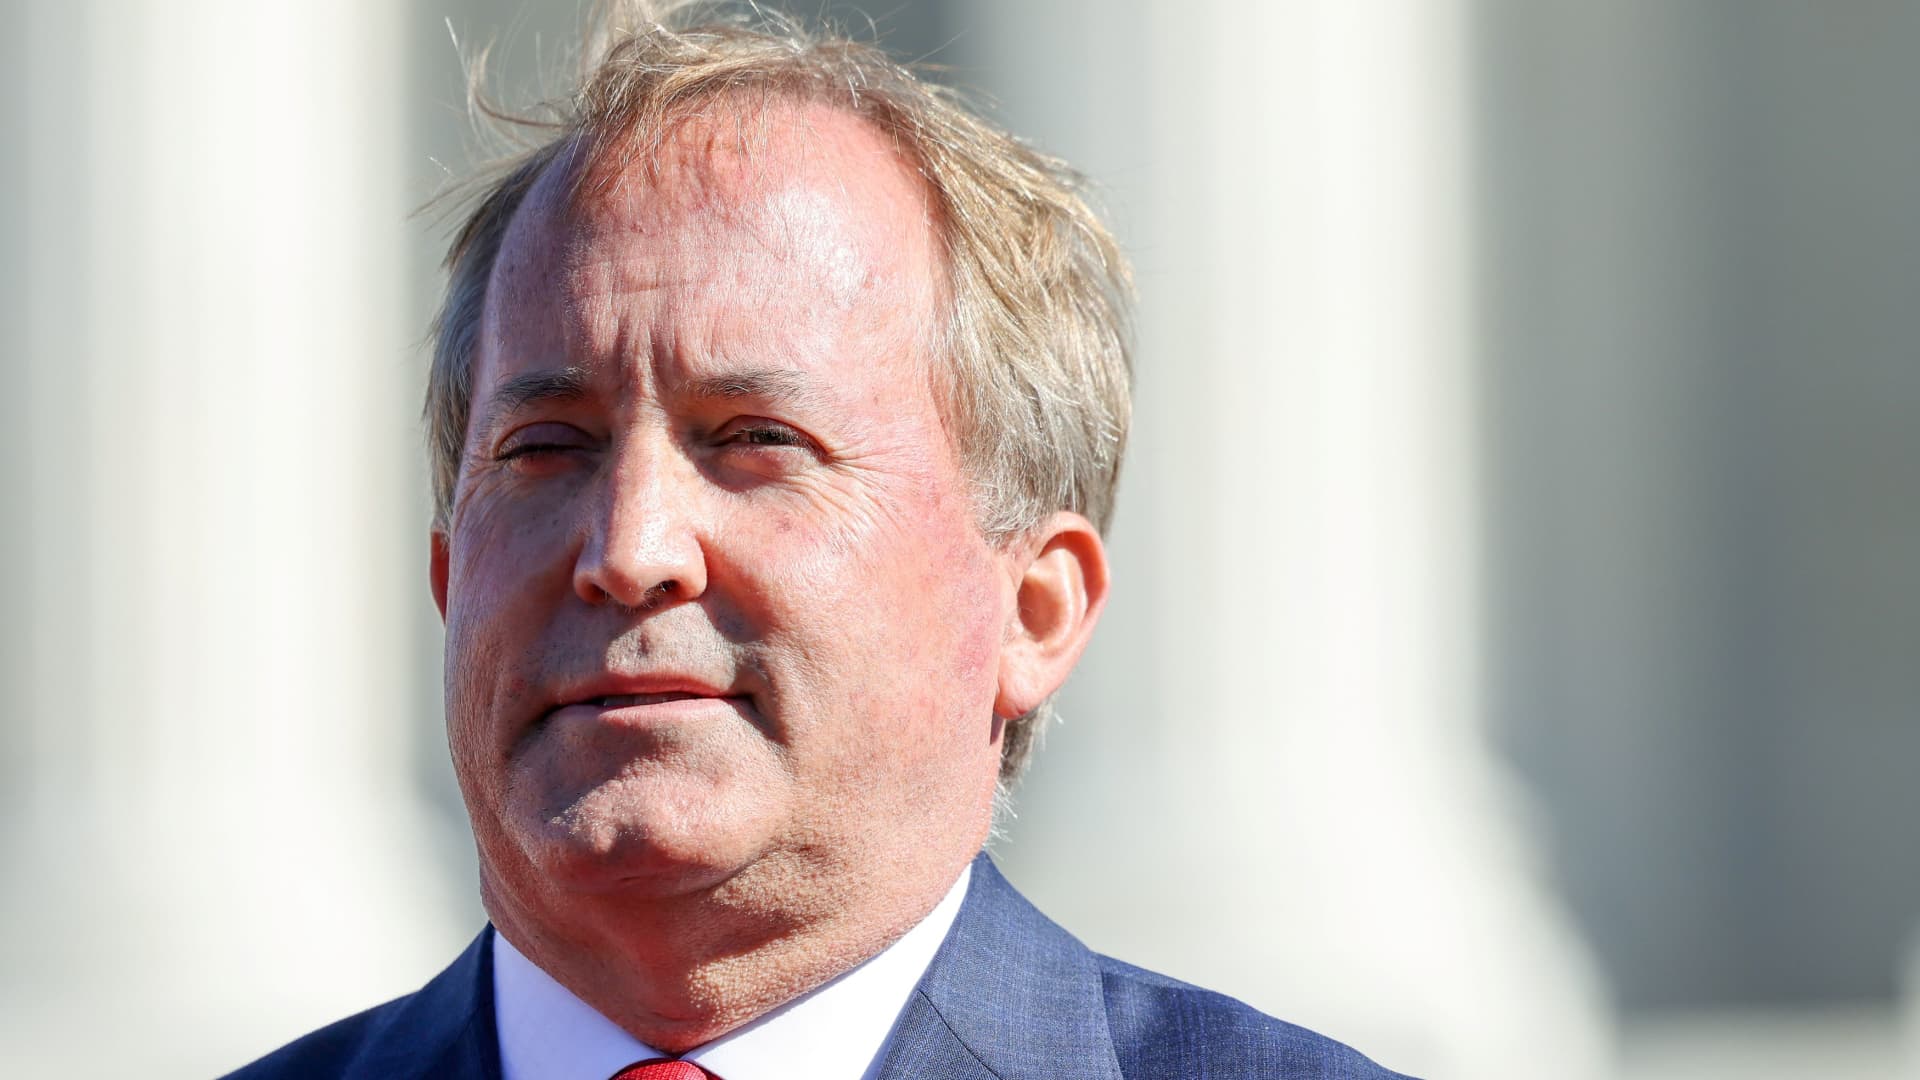 Texas AG Paxton fled home with his wife to avoid subpoena in abortion case